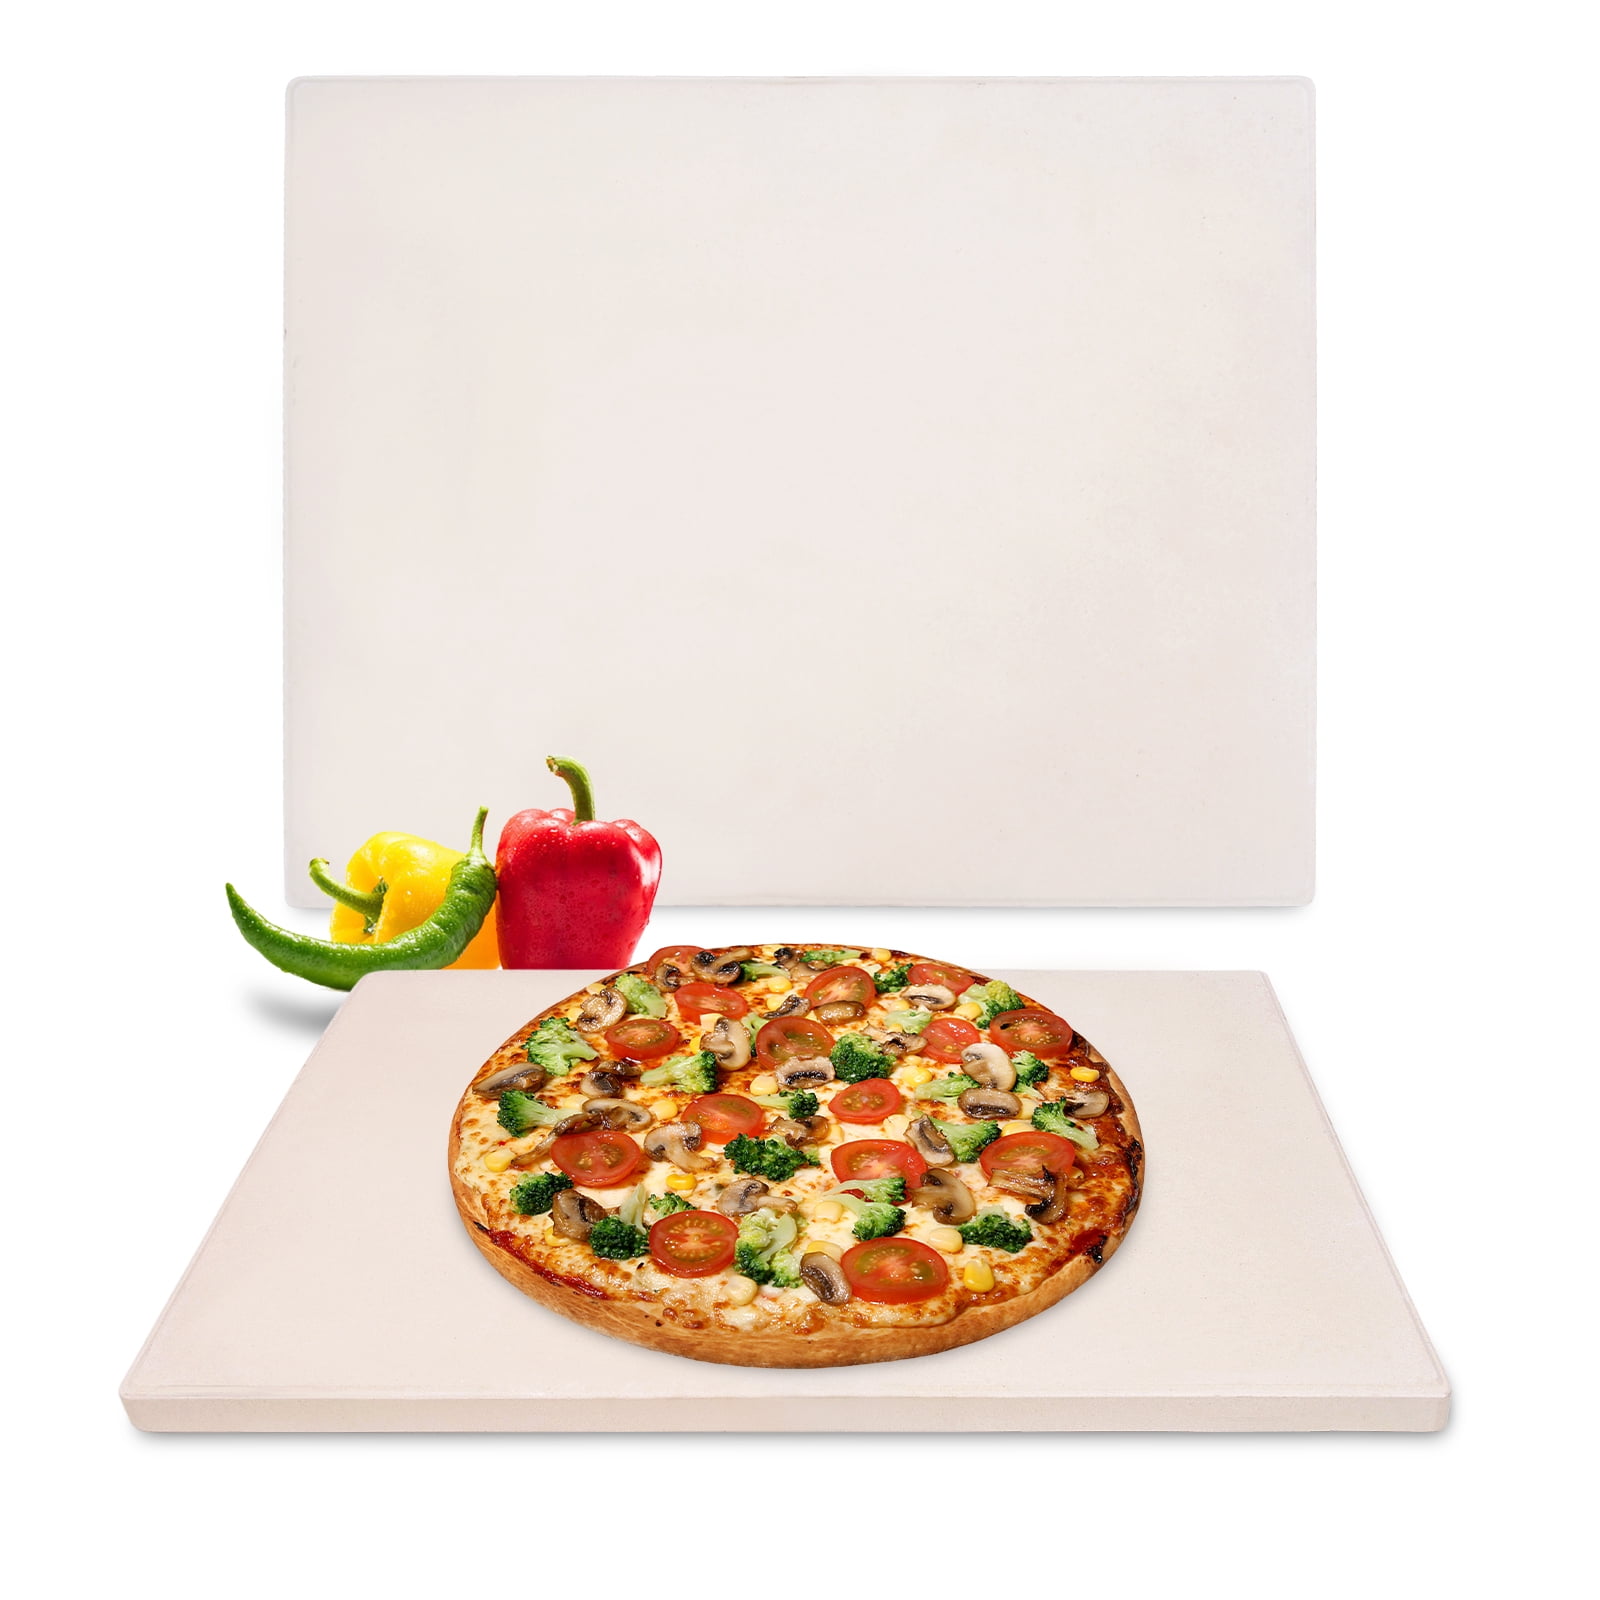 KitchenStar Pizza Stone for Oven and Grill 15x12 inch + Pizza